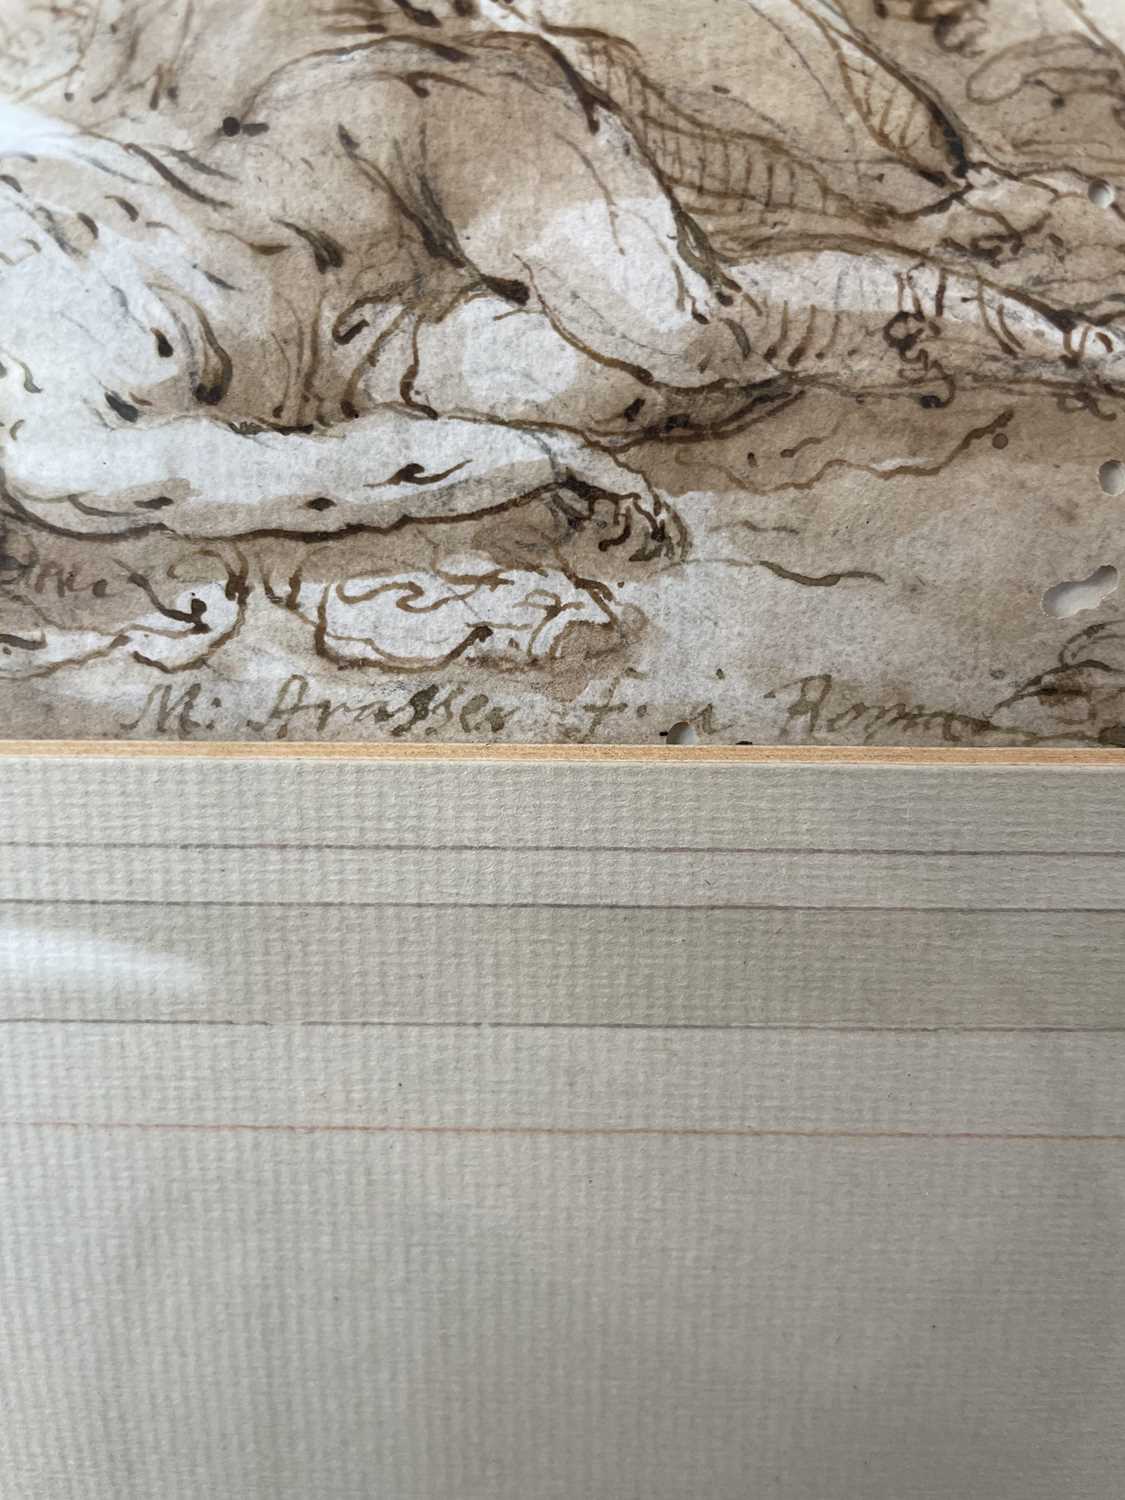 M *Arasser (17th/18th Century) Pyramus and Thisbe Signed and inscribed "Roma", brown ink and pencil, - Image 5 of 23